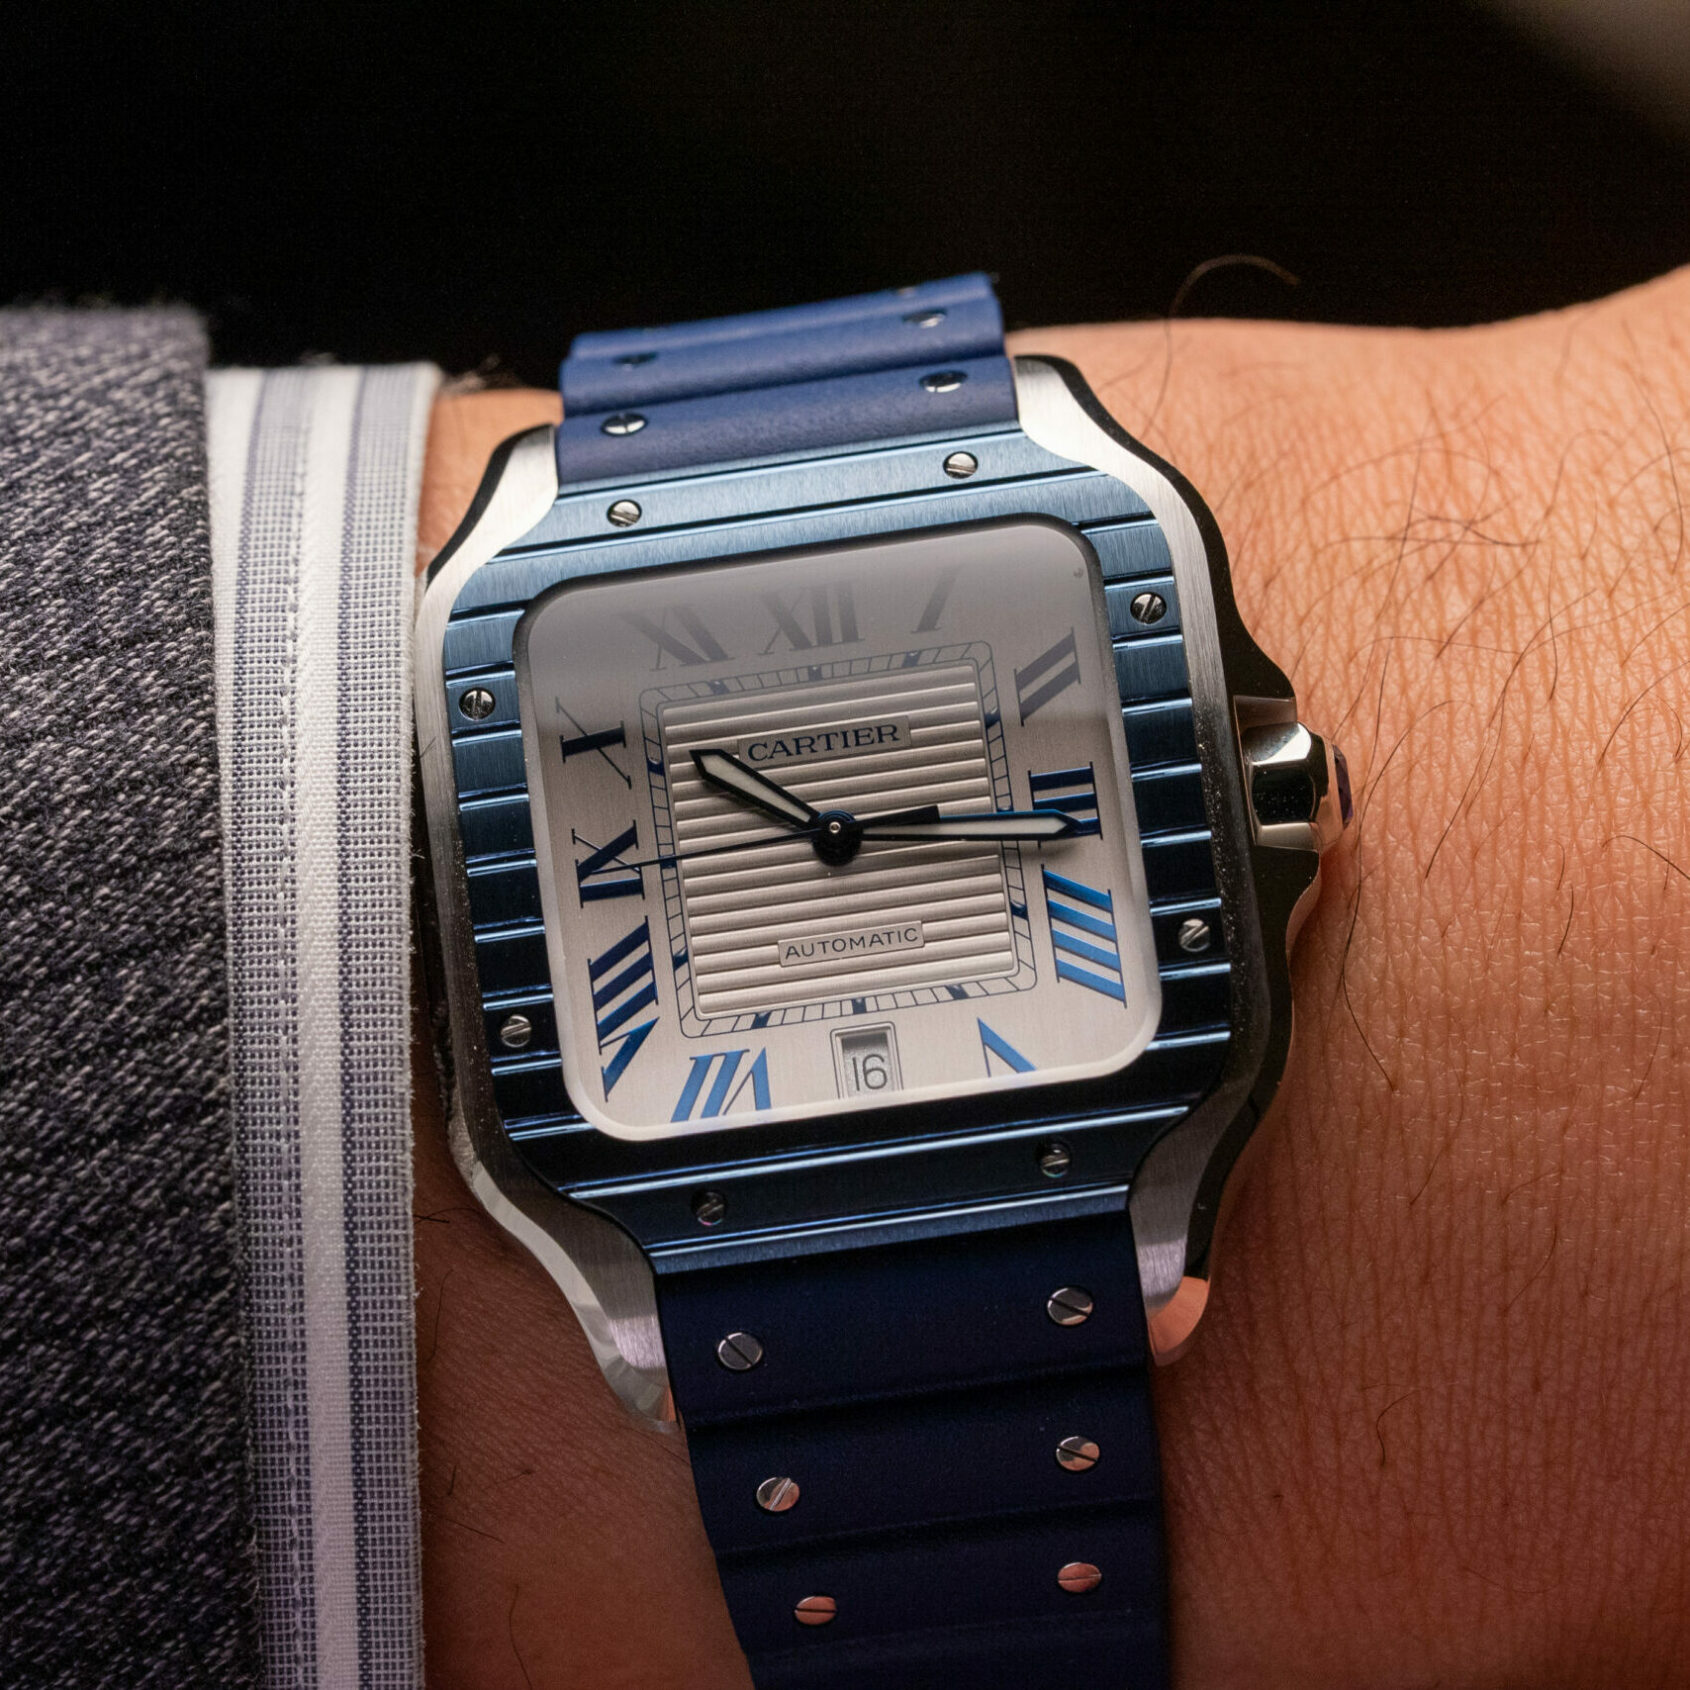 Cartier opens new Sydney flagship boutique – here are 3 watches to check out